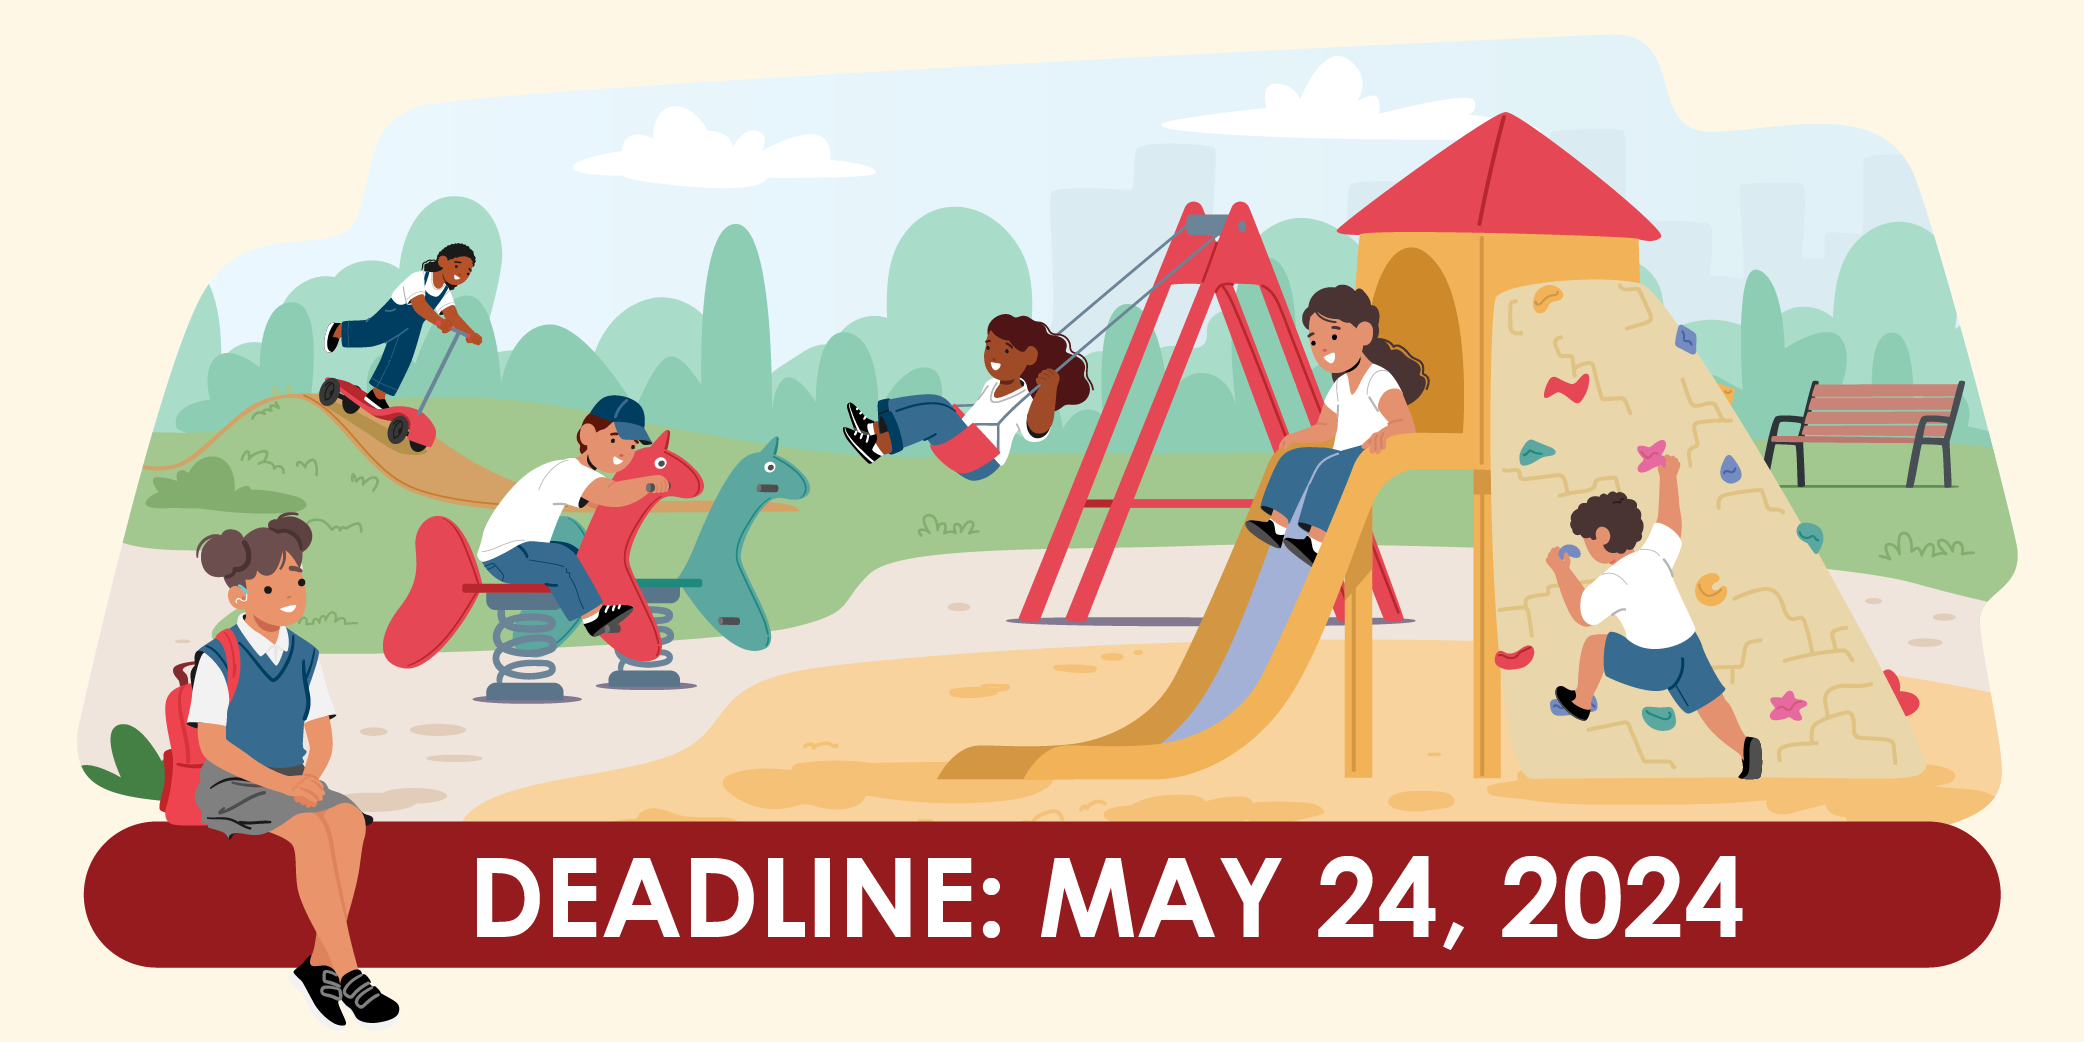 Illustration of children on a playground with the text "Deadline: May 24, 2024"